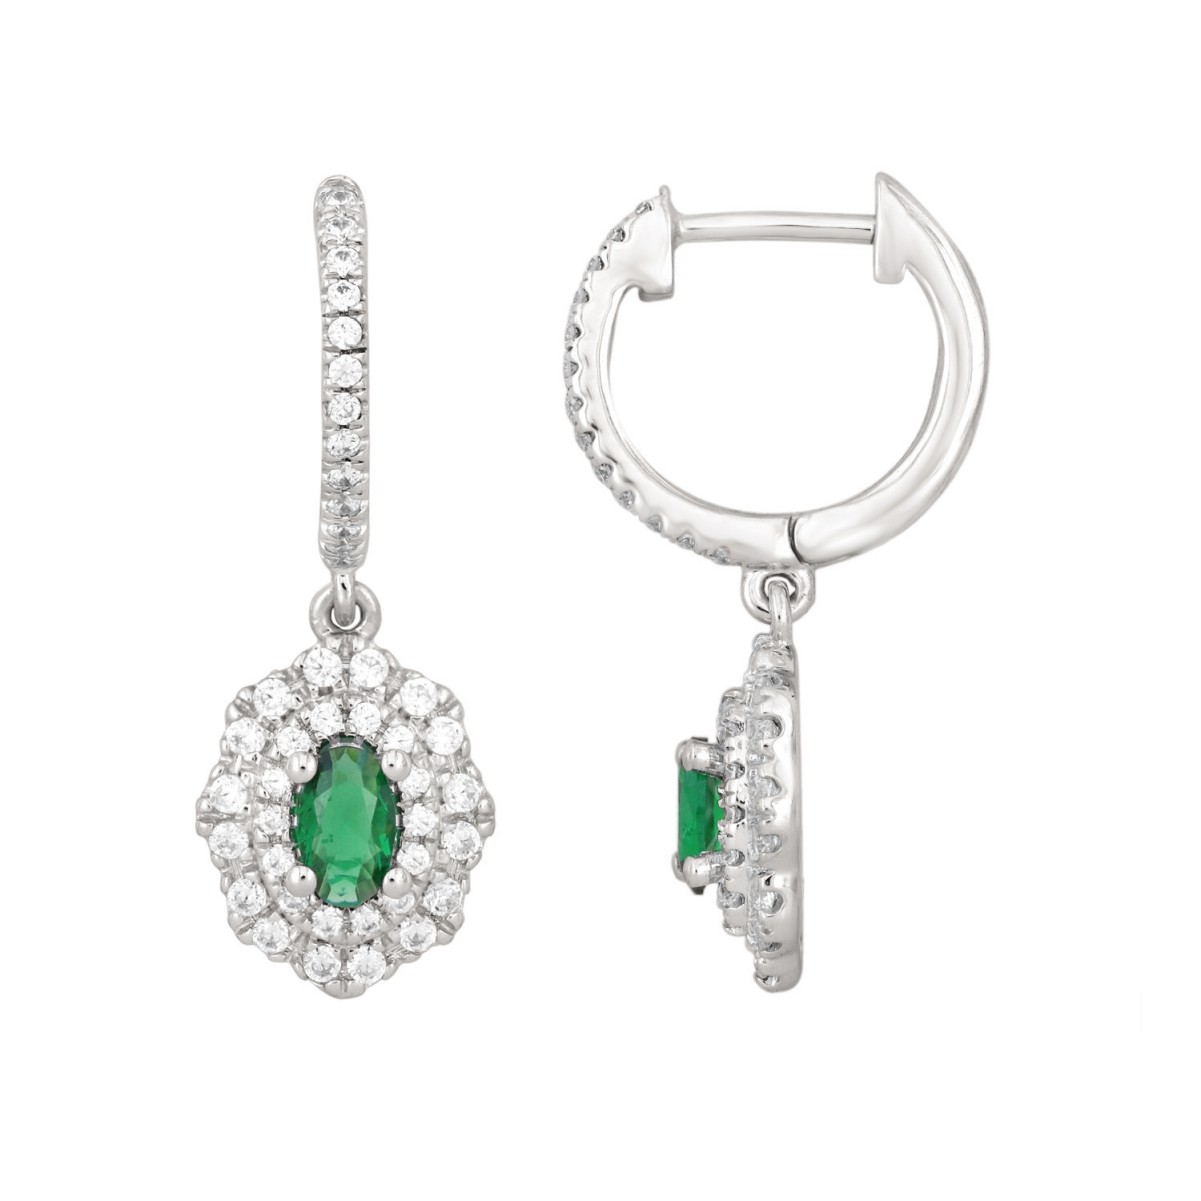 14K WHITE GOLD 1CT ROUND/OVAL DIAMOND LADIES HOOPS EARRINGS(COLOR STONE OVAL GREEN EMERALD DIAMOND 1/2CT)